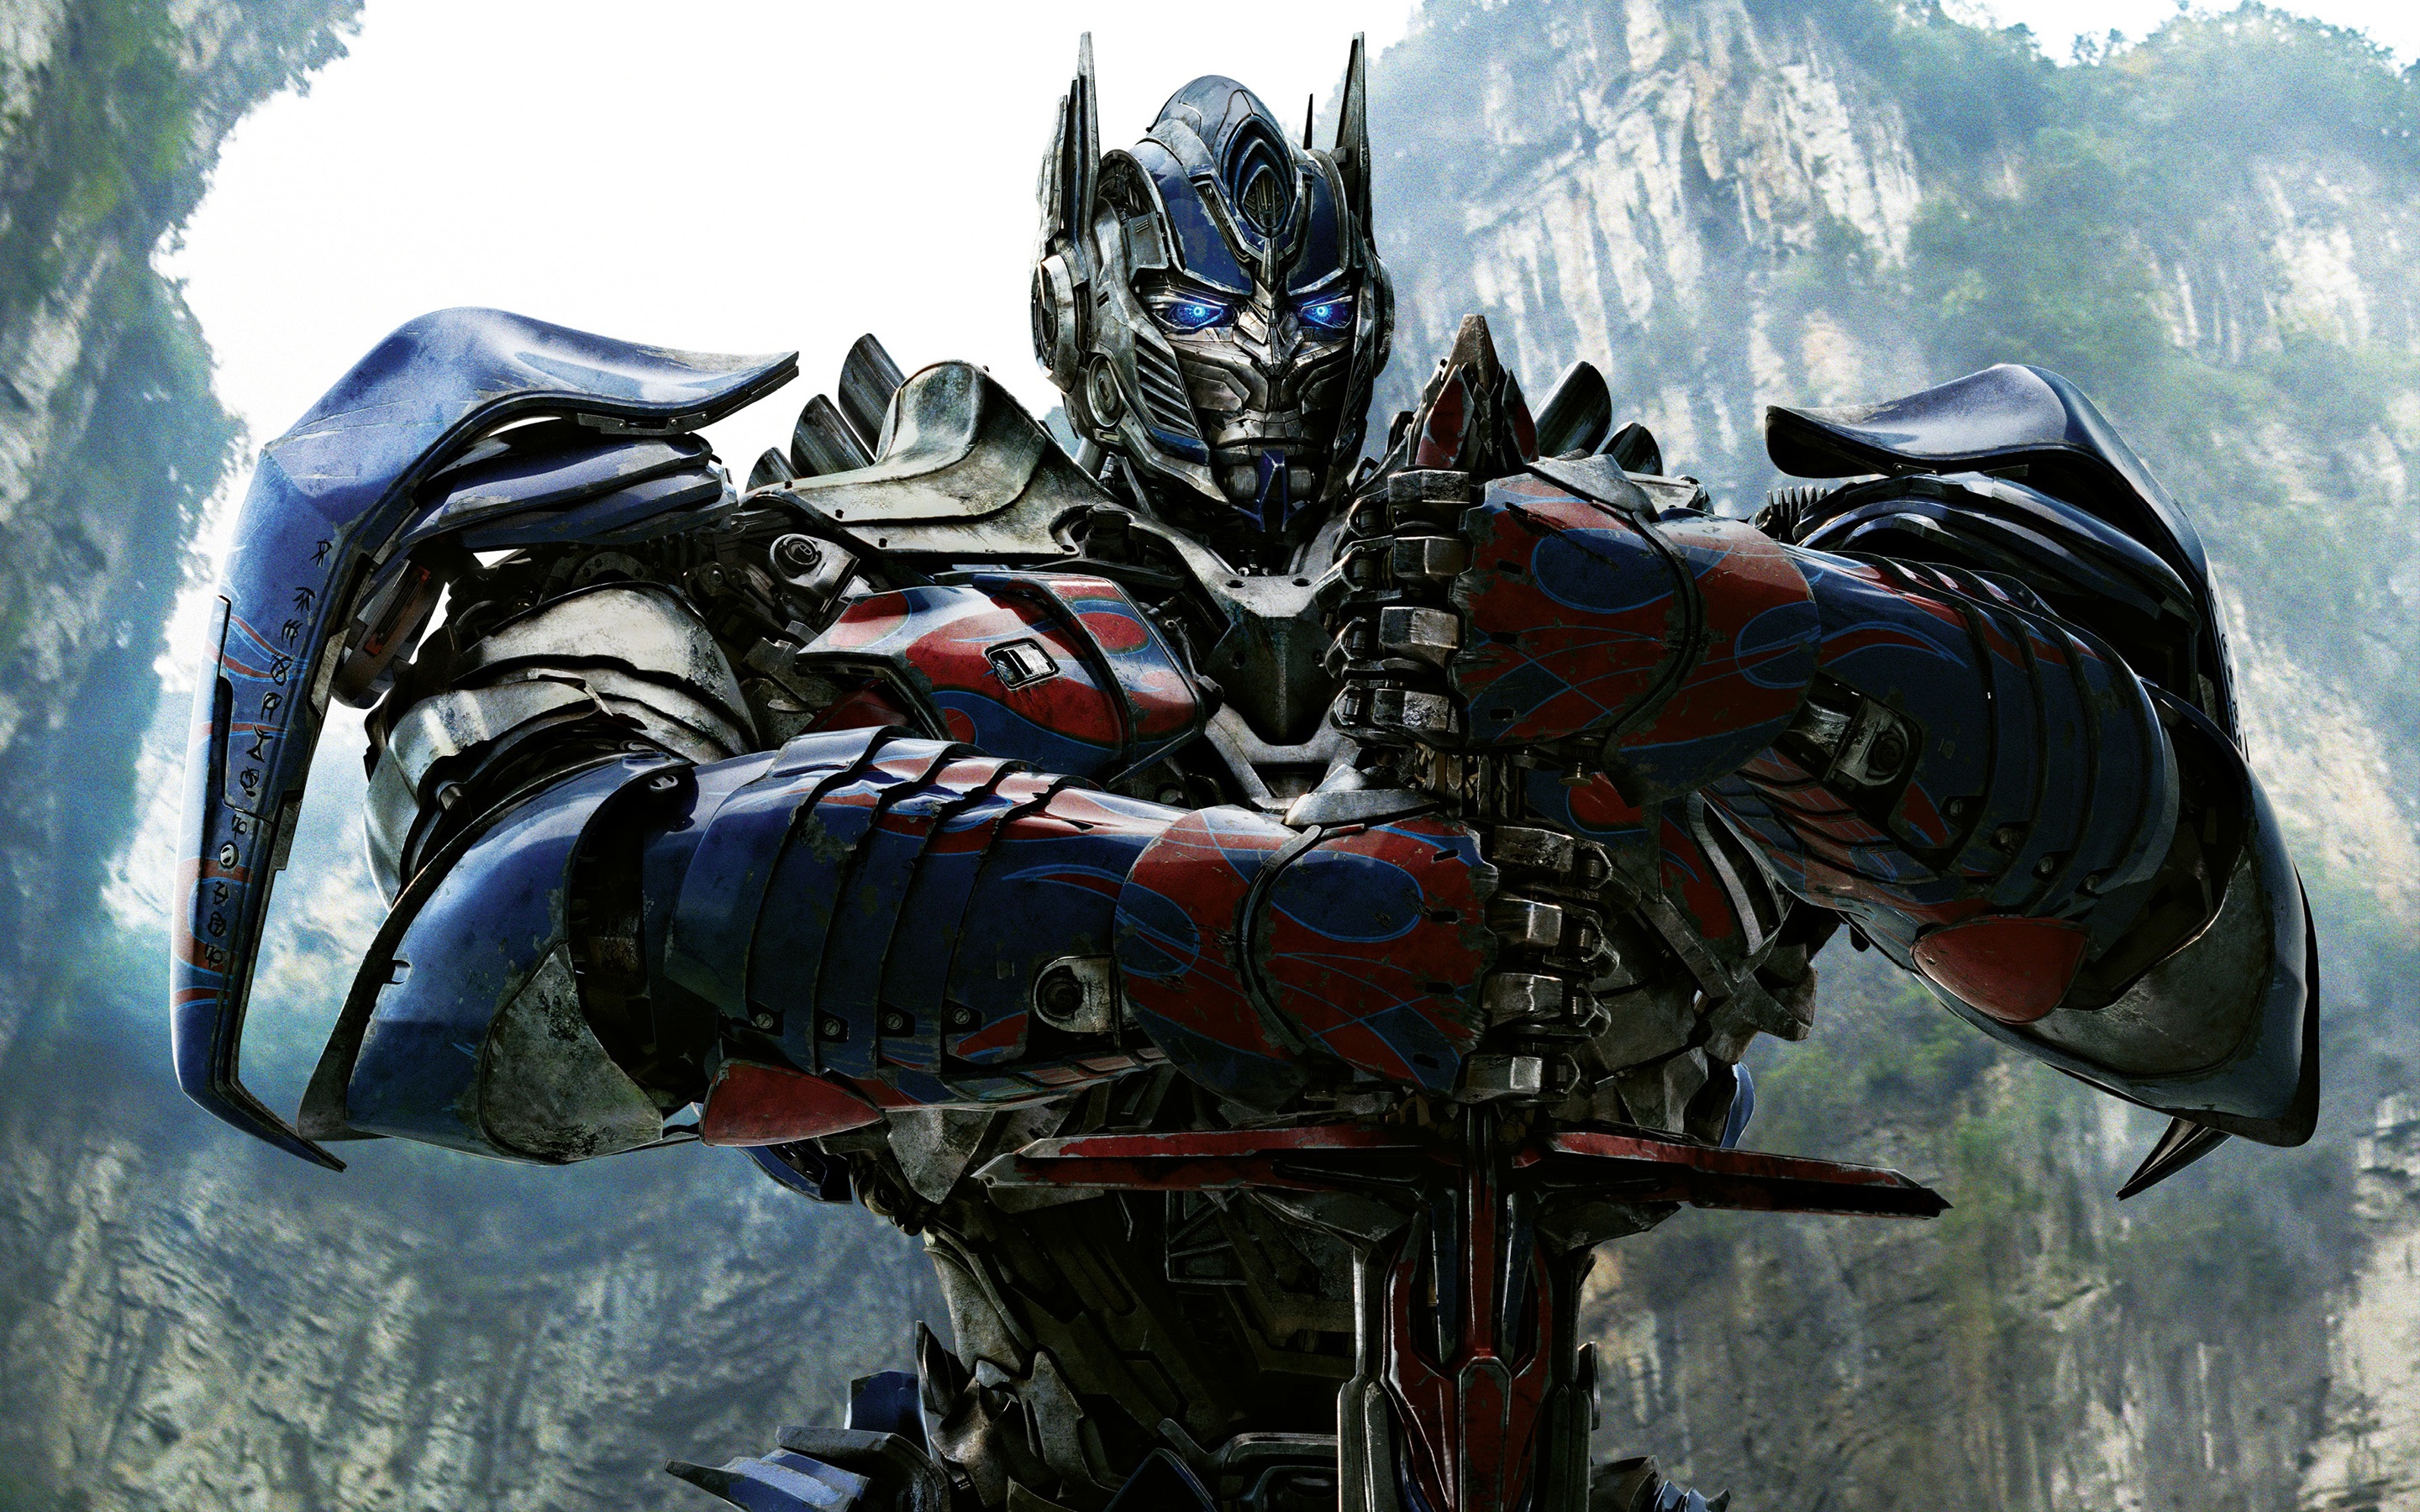 Wallpaper Transformers The Last Knight Transformers 5 4k Movies 14153   Page 4